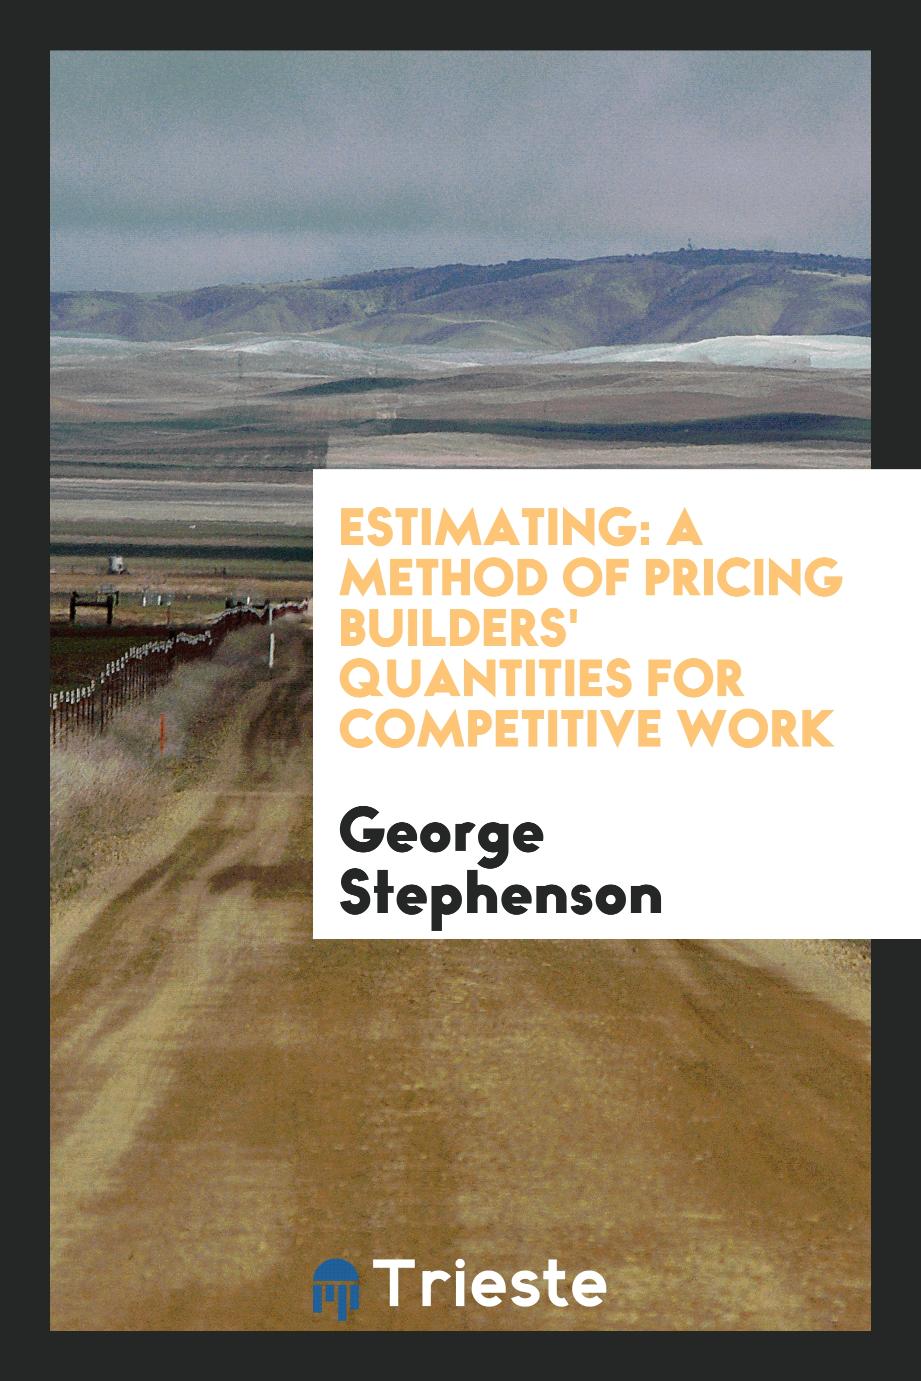 George Stephenson - Estimating: A Method of Pricing Builders' Quantities for Competitive Work